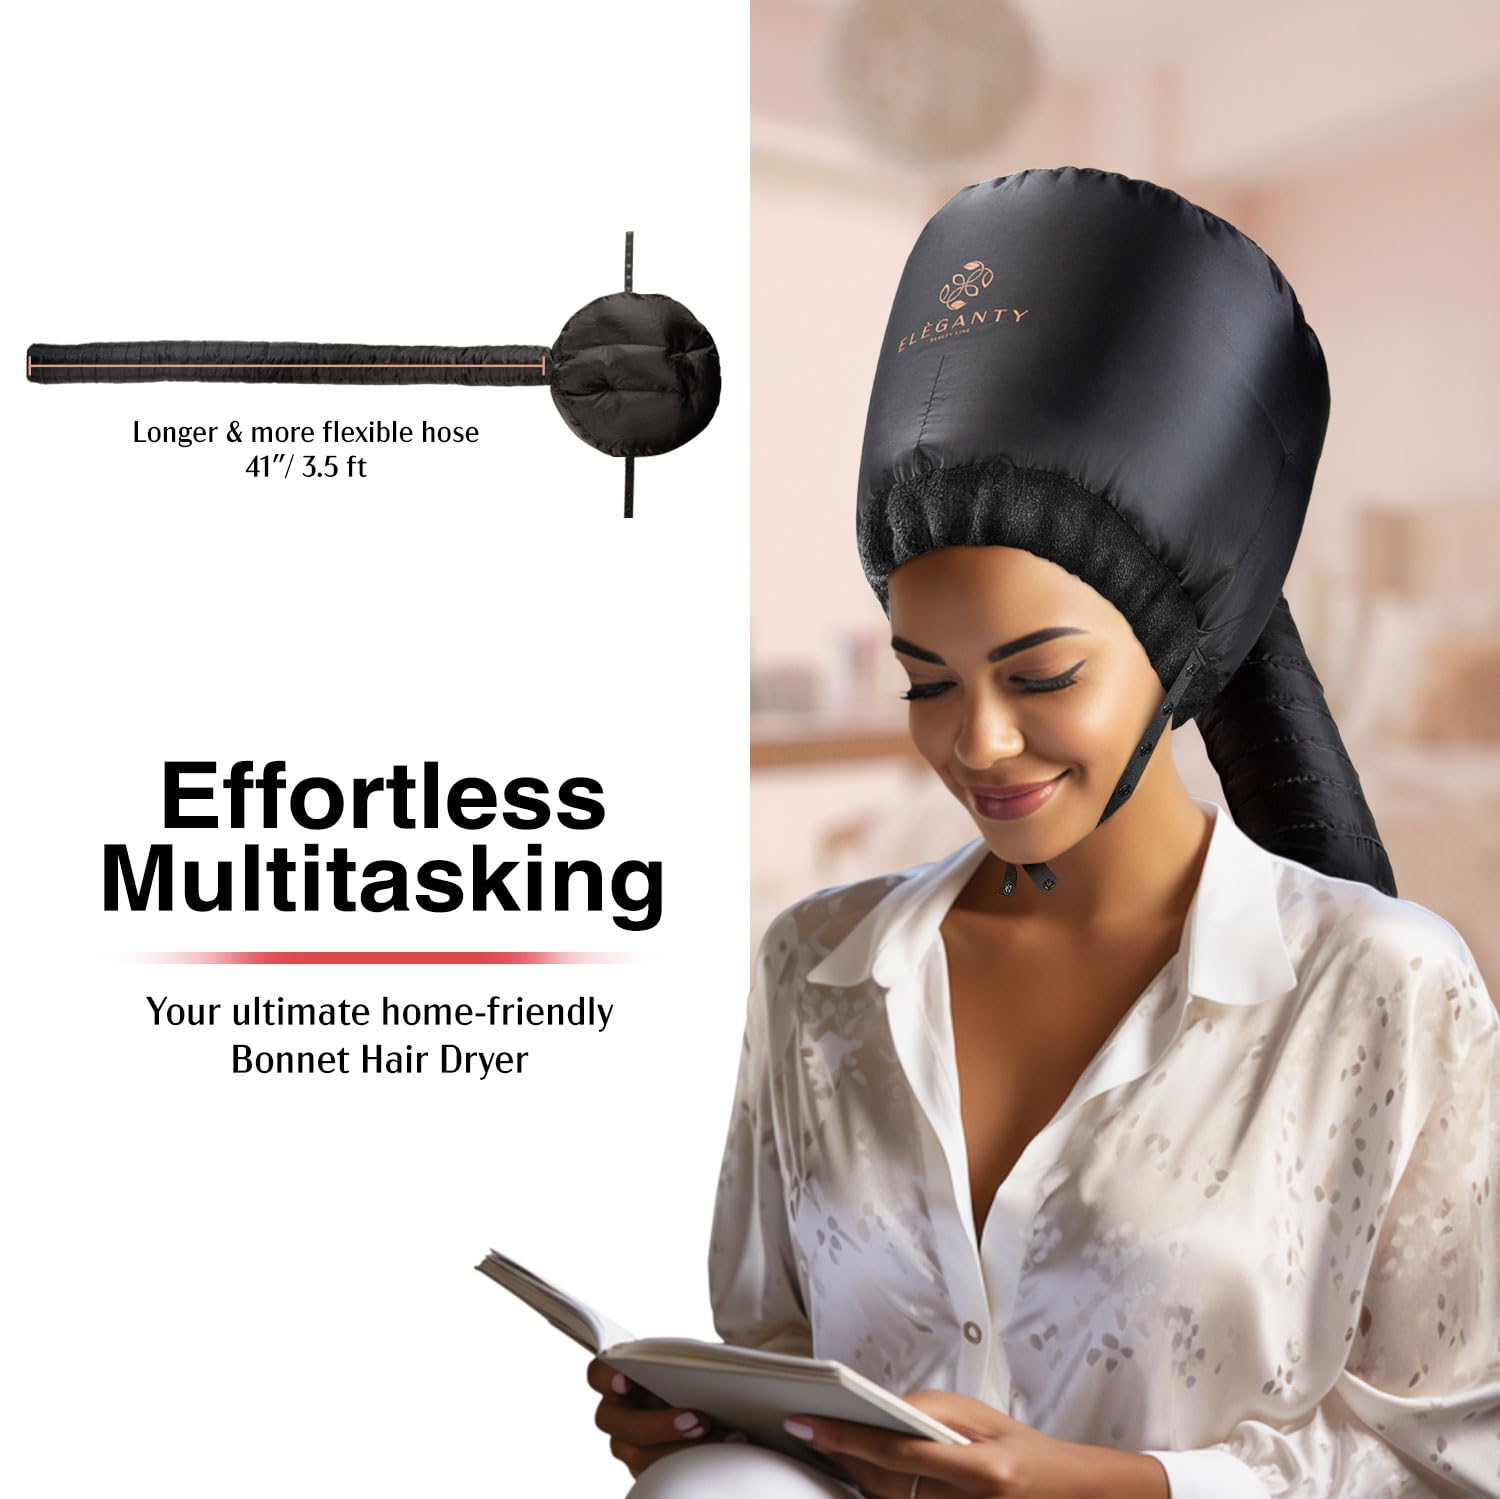 ELEGANTY Soft Bonnet Hood Hairdryer Attachment with Headband that Reduces Heat Around Ears and Neck to Enjoy Long Sessions - Used for Hair Styling, Deep Conditioning and Hair Drying (Black)